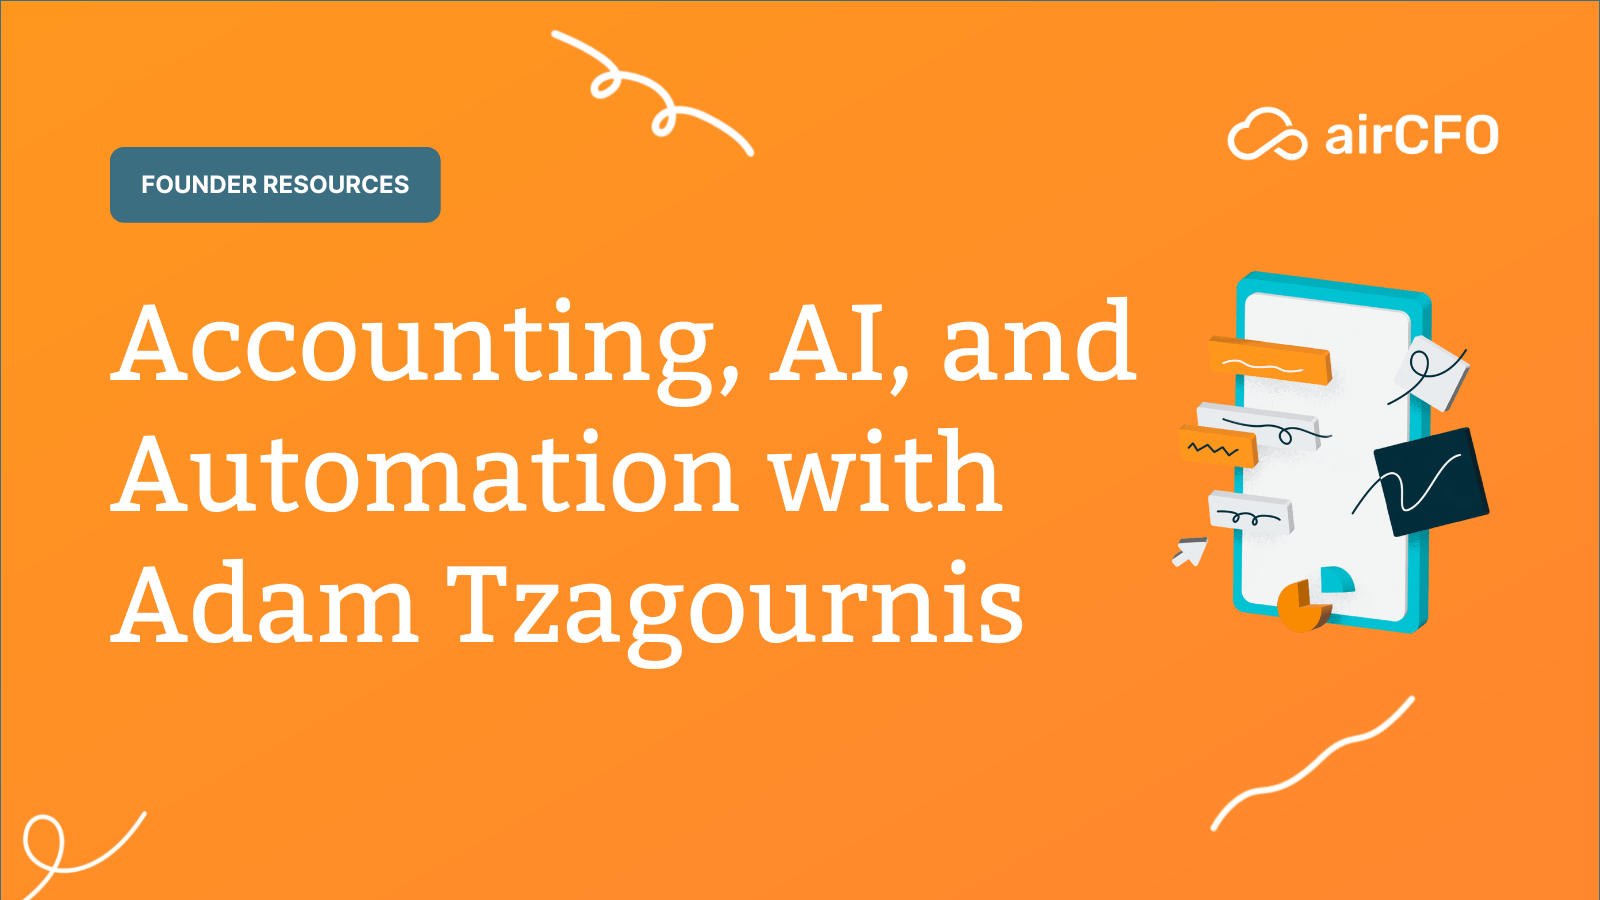 Accounting, AI, and Automation: Adam Tzagournis on the Changing Landscape of the Finance Industry